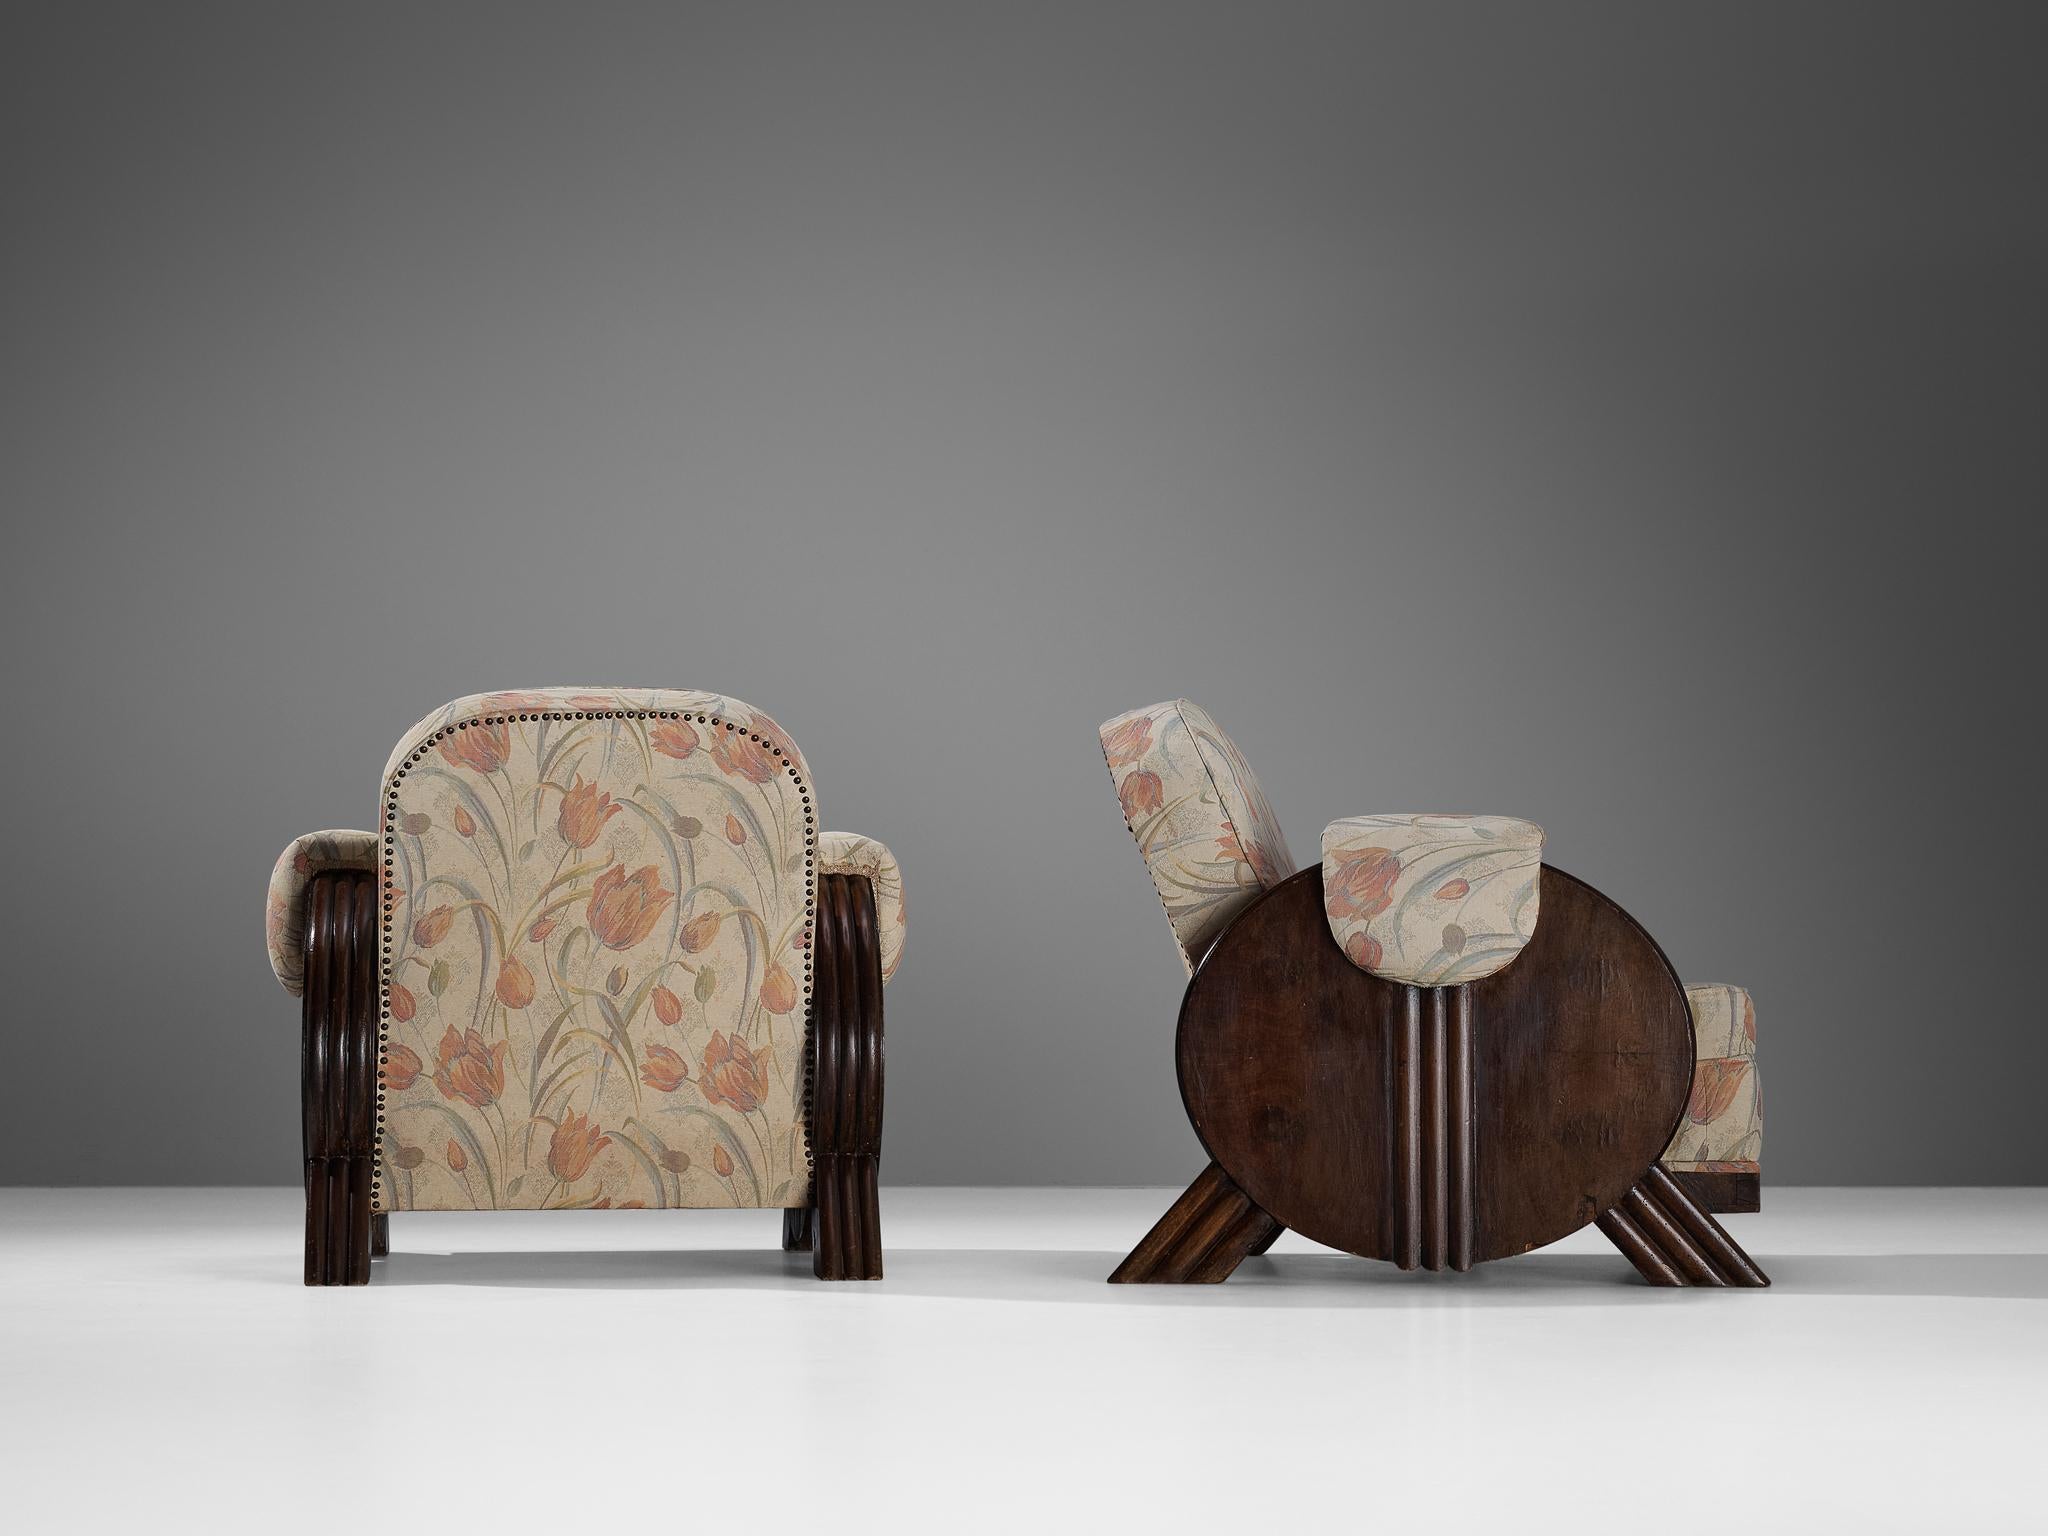 Italian Art Deco Pair of Lounge Chairs in Floral Upholstery and Wood For Sale 4